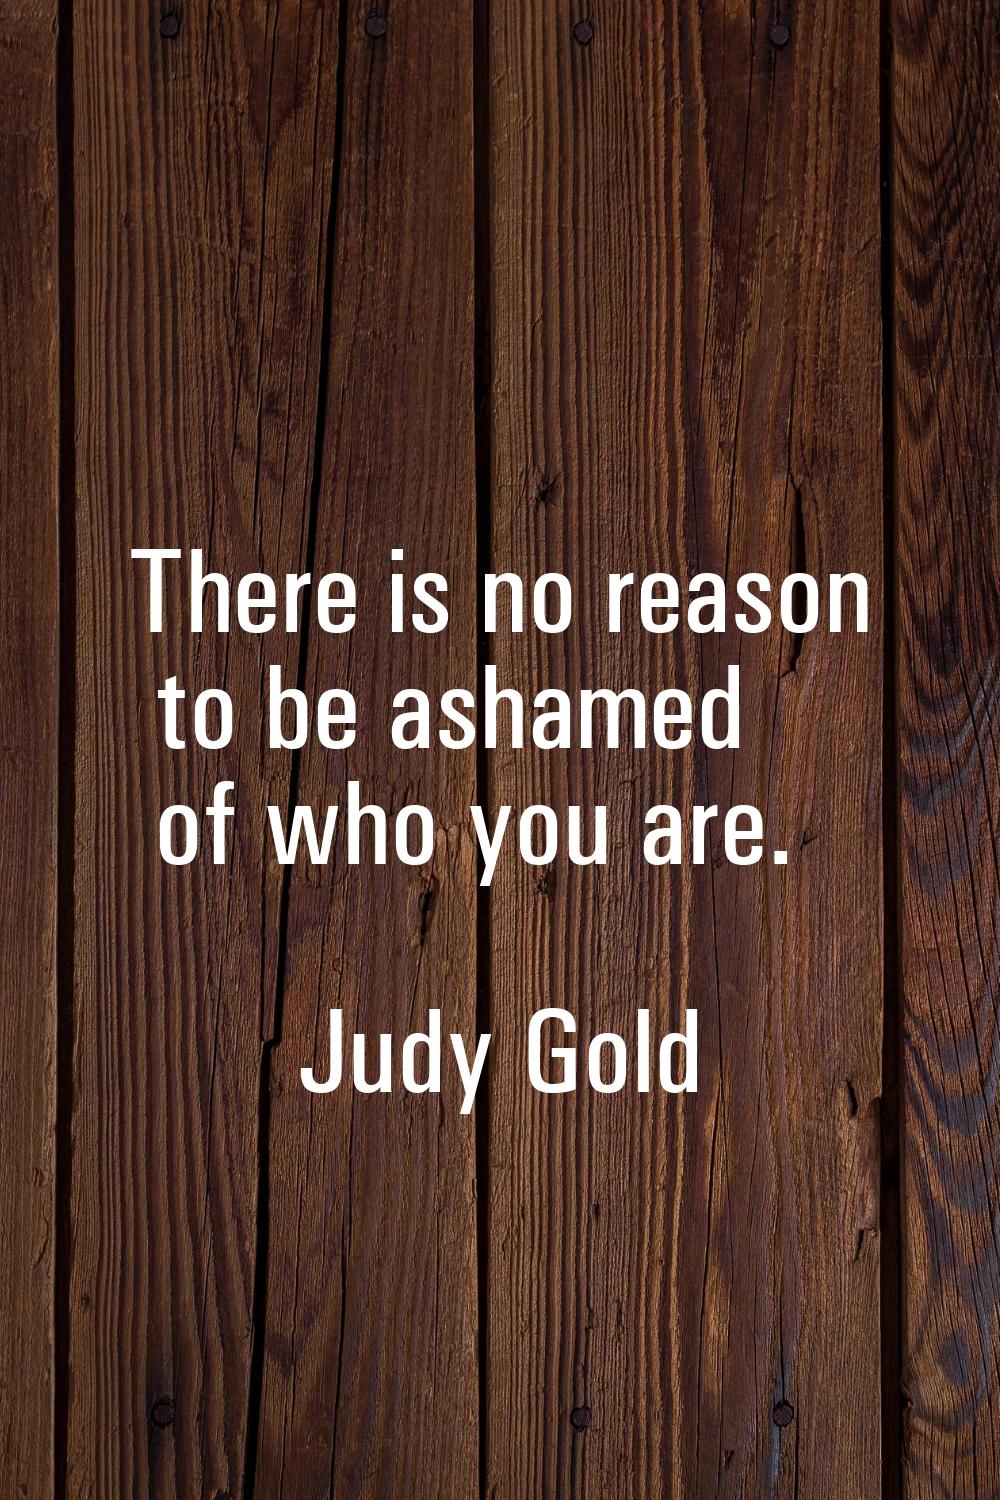 There is no reason to be ashamed of who you are.